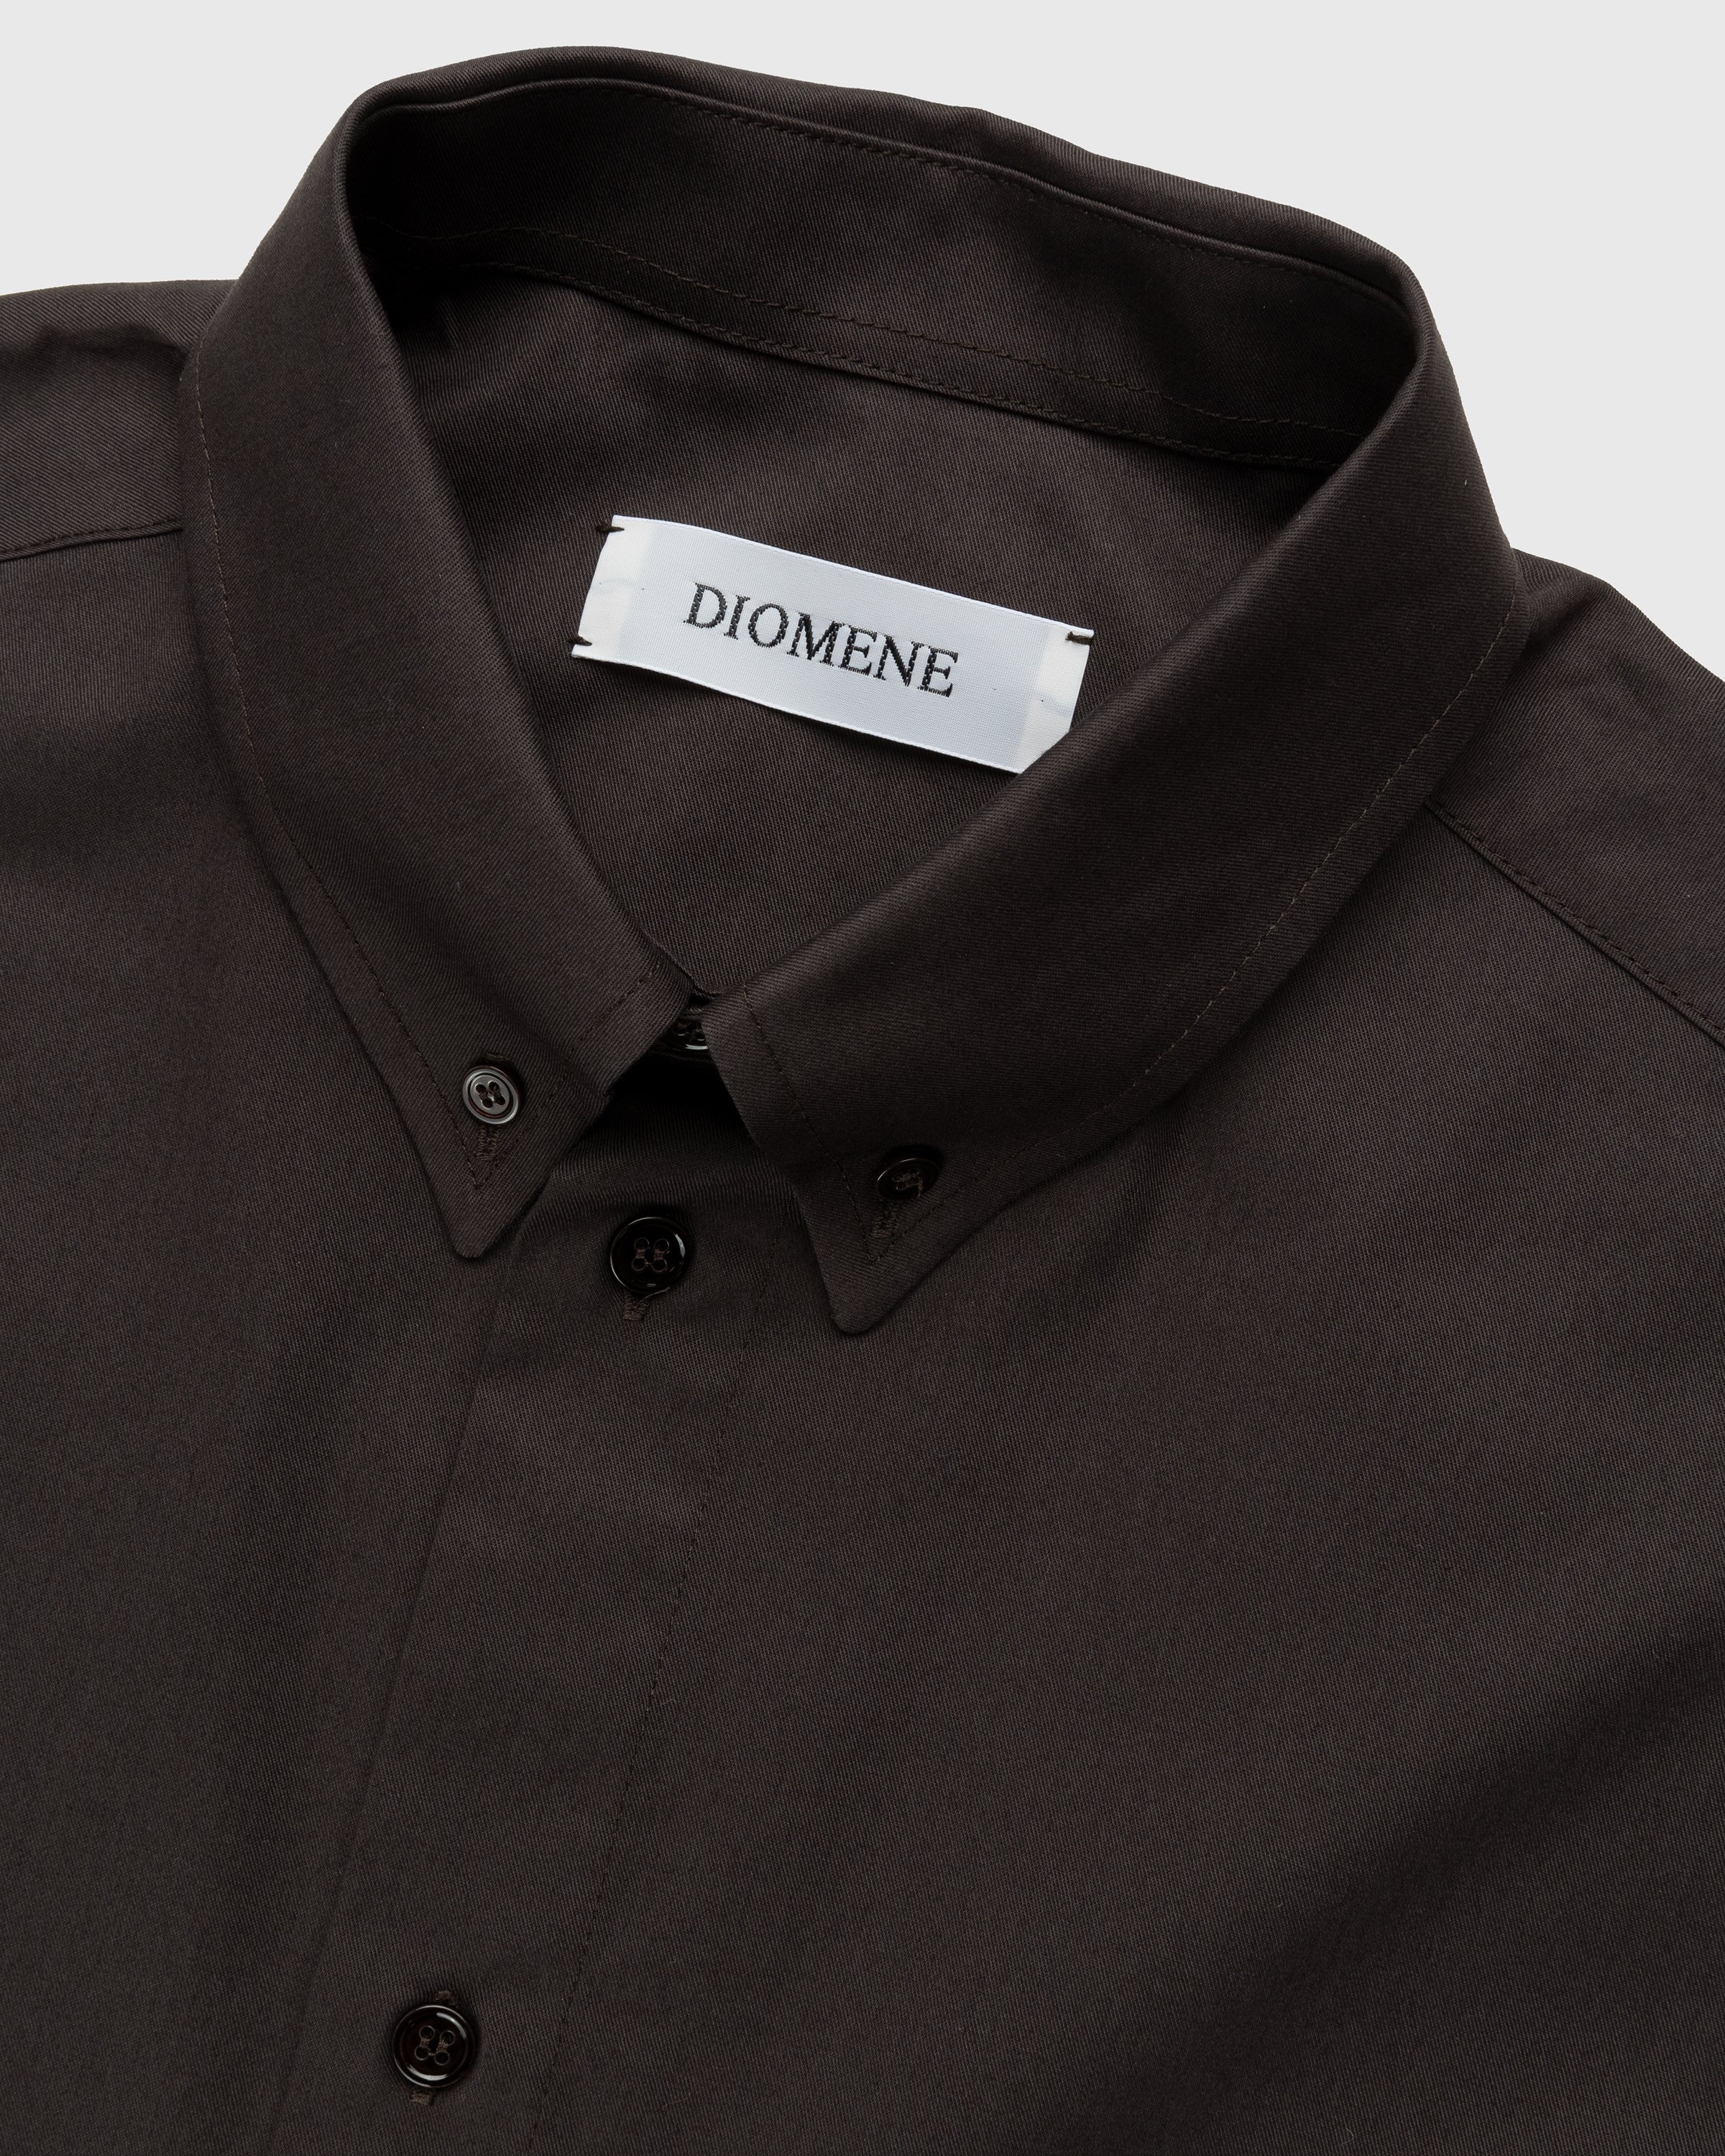 Diomene by Damir Doma - Button-Down Overshirt Licorice - Clothing - Beige - Image 4